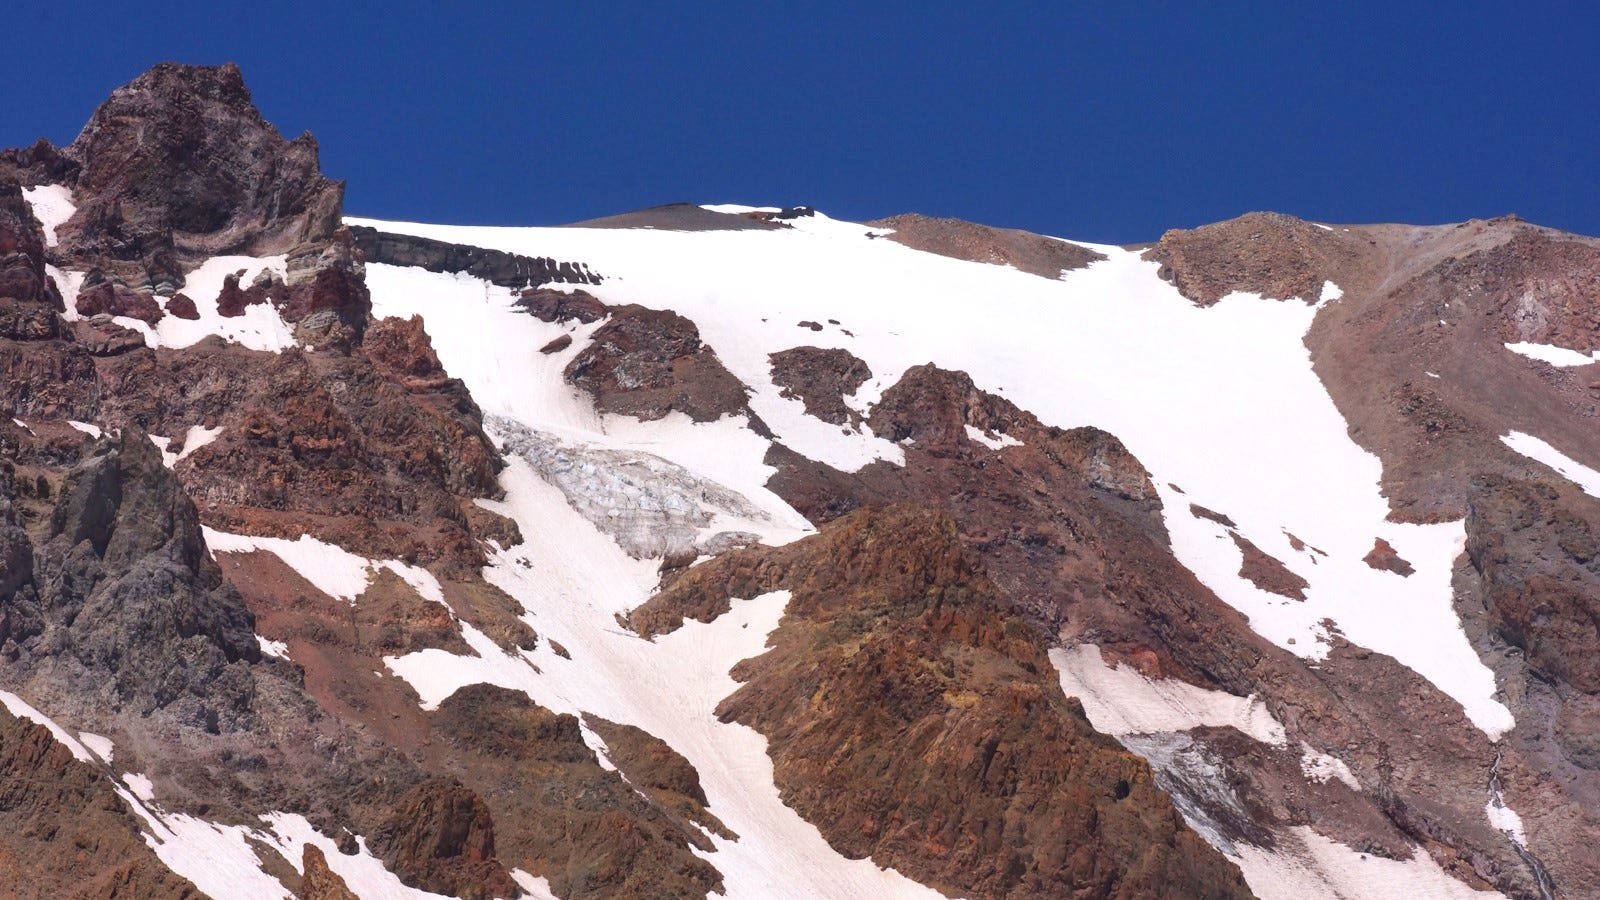 The Konwakiton Glacier is located on the south side of Mt. Shasta.